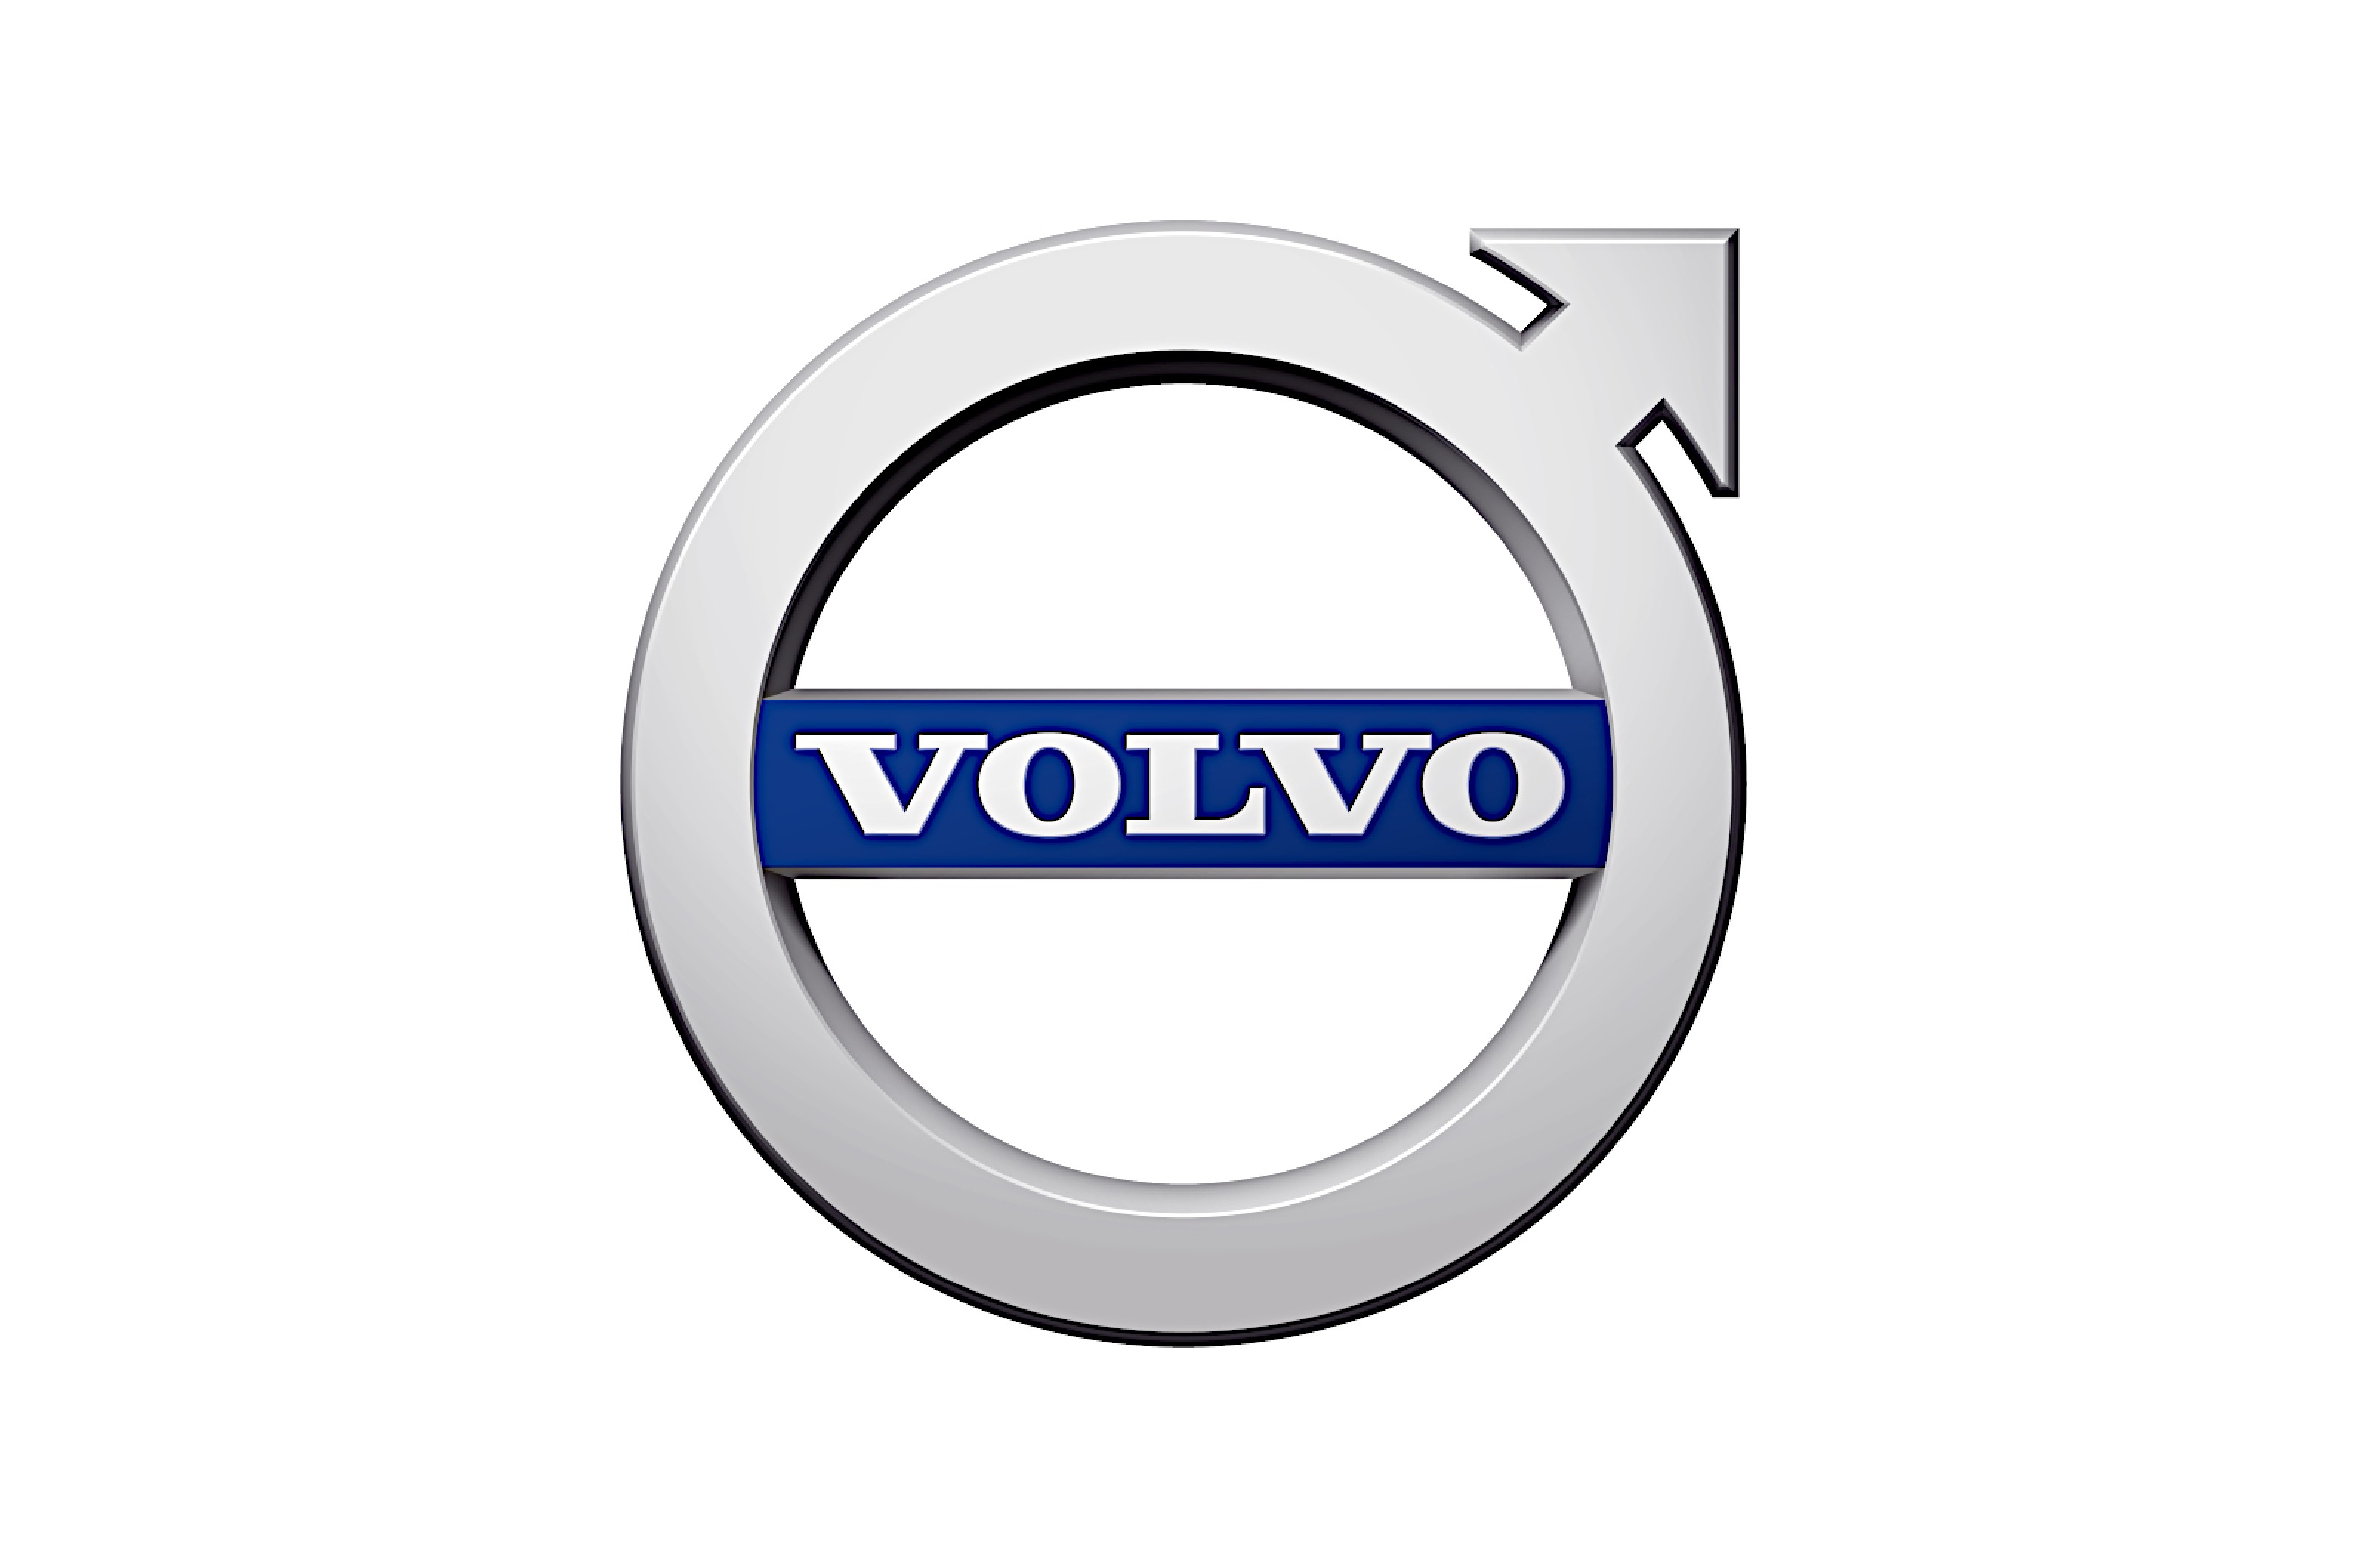 <p>Ever since Volvo entered the motor industry with the ÖV 4 in 1927, its cars have featured a circle with an arrow pointing diagonally upwards to the right.</p>  <p>These represent, respectively, the shield and spear of the Roman god Mars. The symbol also signifies the male gender and – of more relevance in Volvo’s case – the chemical element iron.</p>  <p>When fitted to the front of a car, the logo is traditionally mounted in the center of a long diagonal running across the radiator grille.</p>  <p>This originally supported the badge, and while there’s no need for that now, Volvo continues to use it – even on the all-electric C40 Recharge, which has no radiator or grille at all.</p>